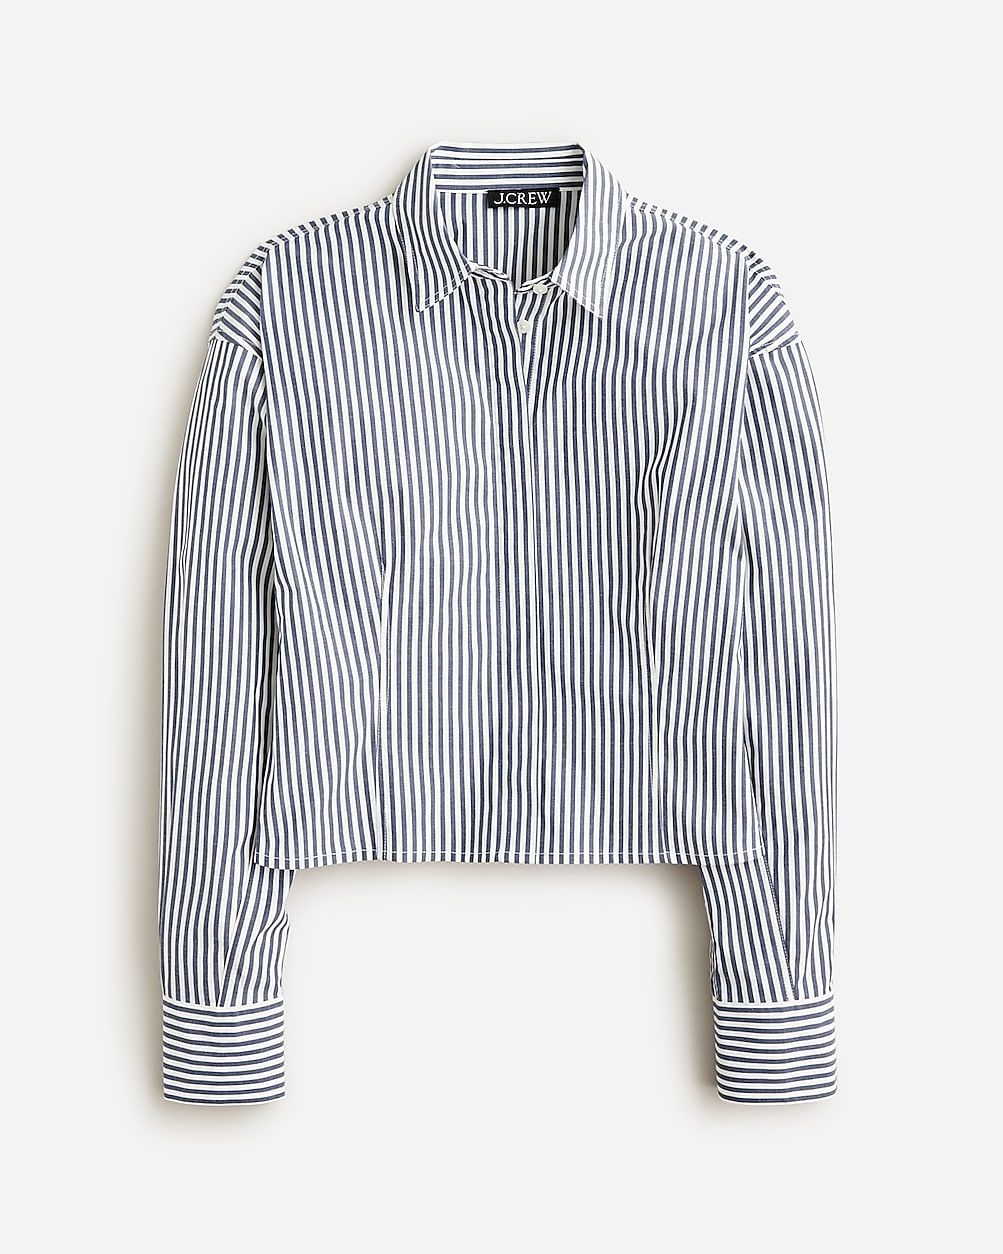 Fitted button-up shirt in striped stretch cotton poplin | J.Crew US